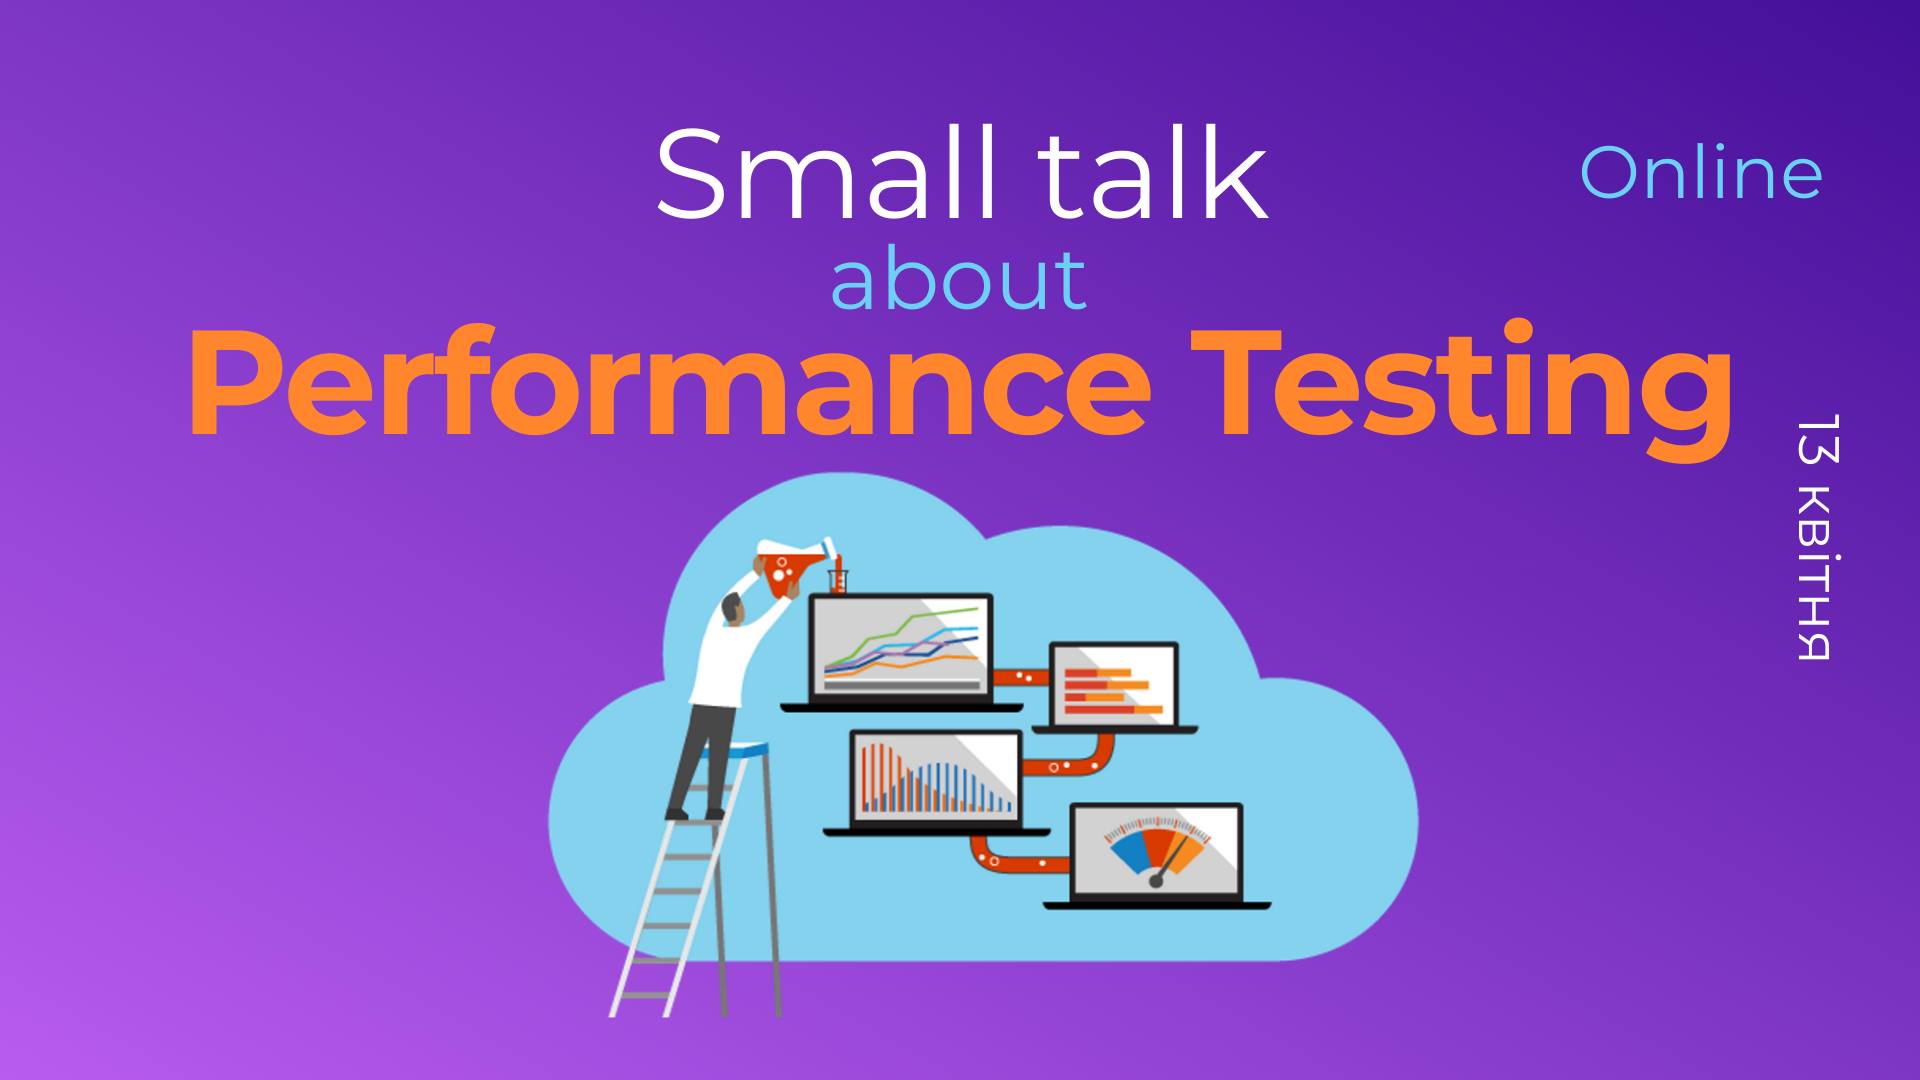 Small talk about Performance Testing